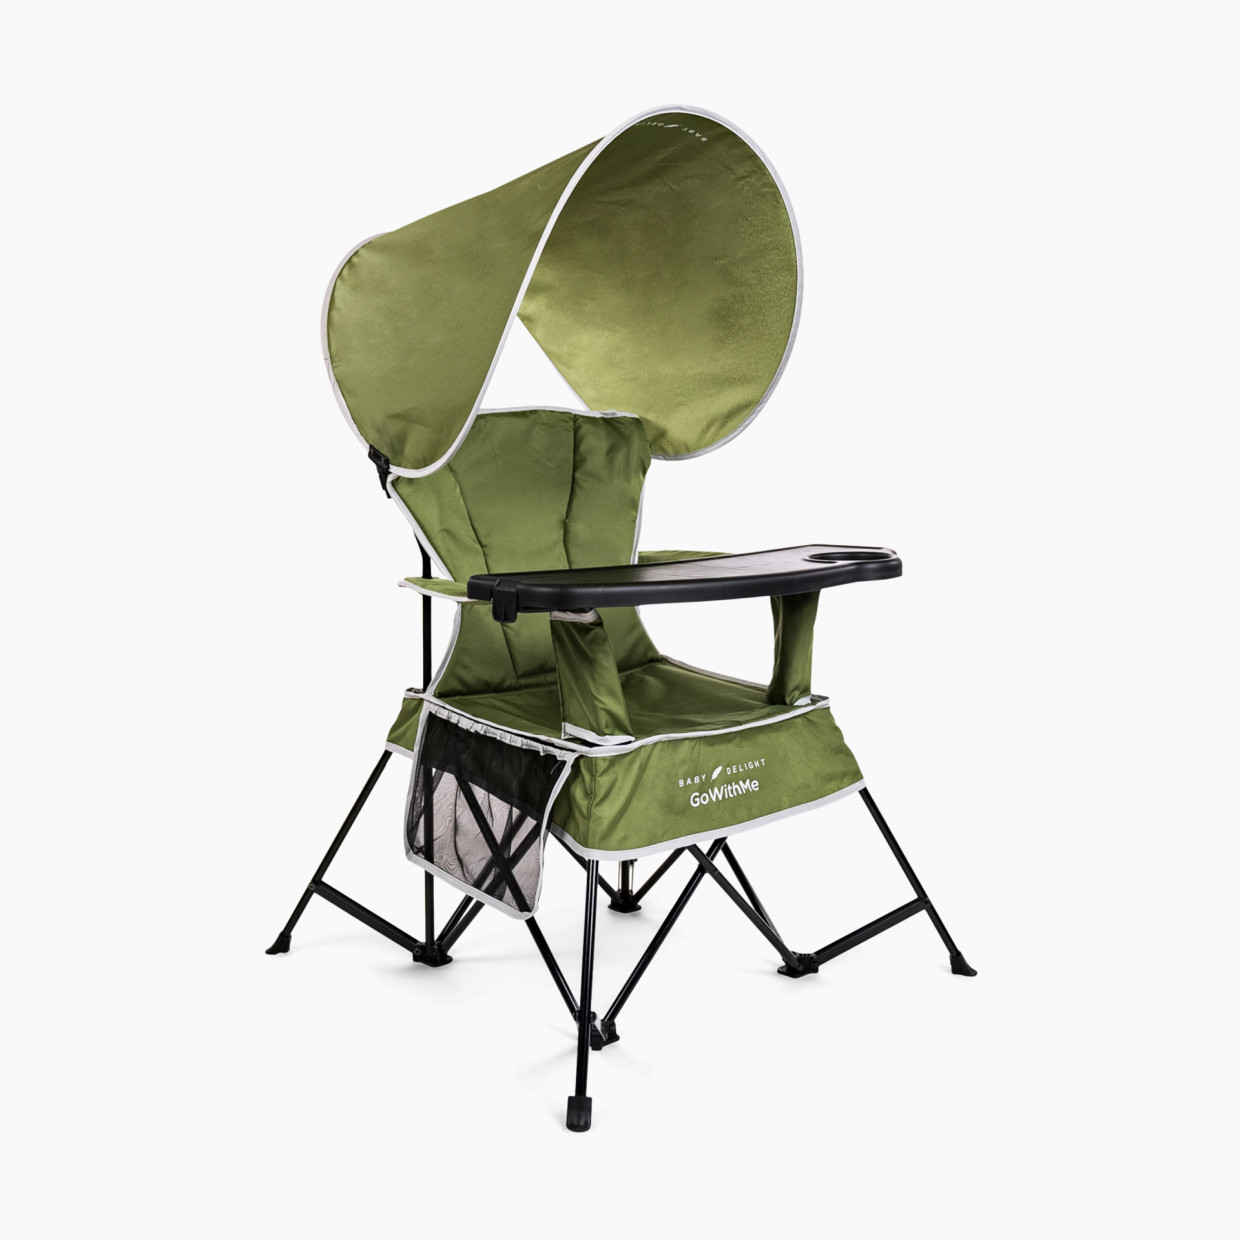 Baby Delight Go With Me Grand Deluxe Portable Chair - Moss Budd.